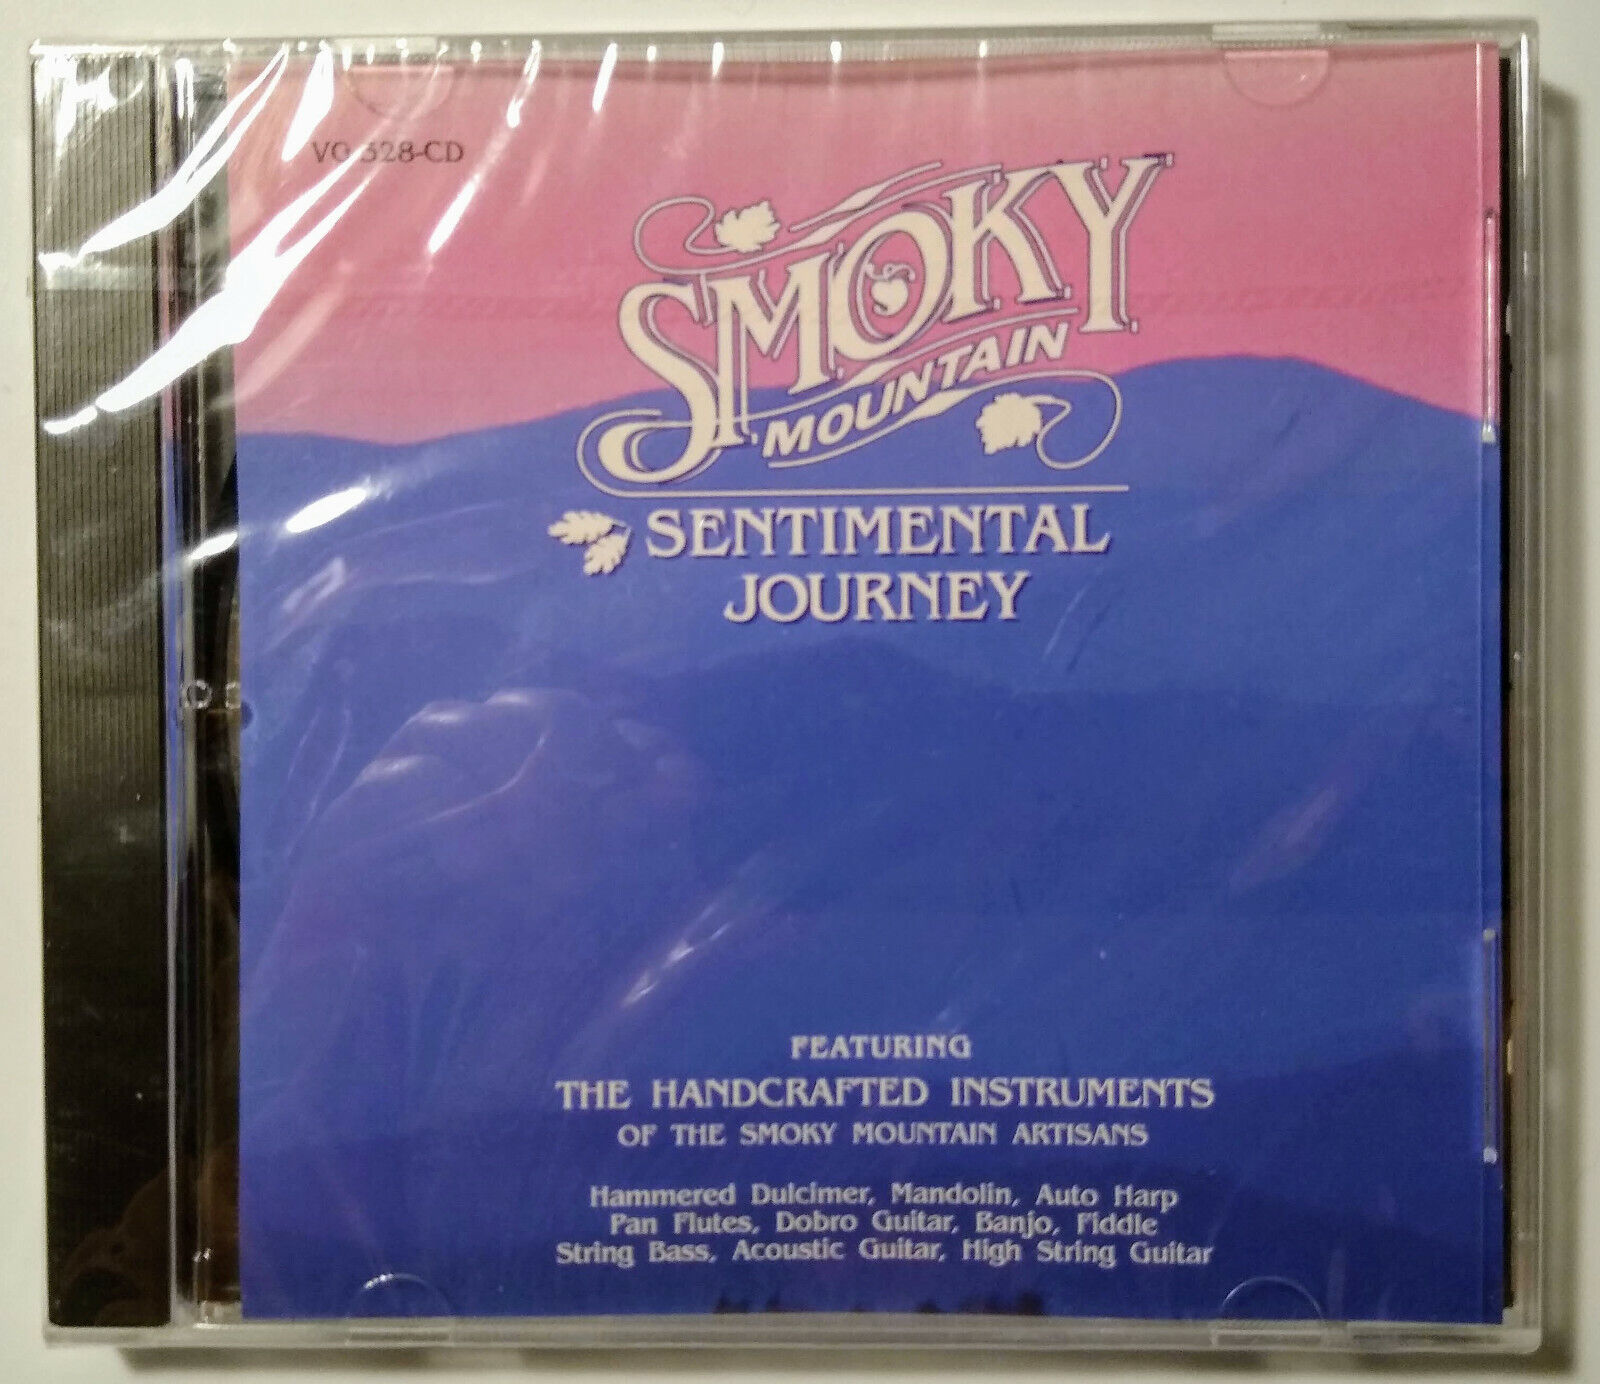 NEW CD Smoky Mountain Sentimental Journey Handcrafted Instruments 1992 Americana